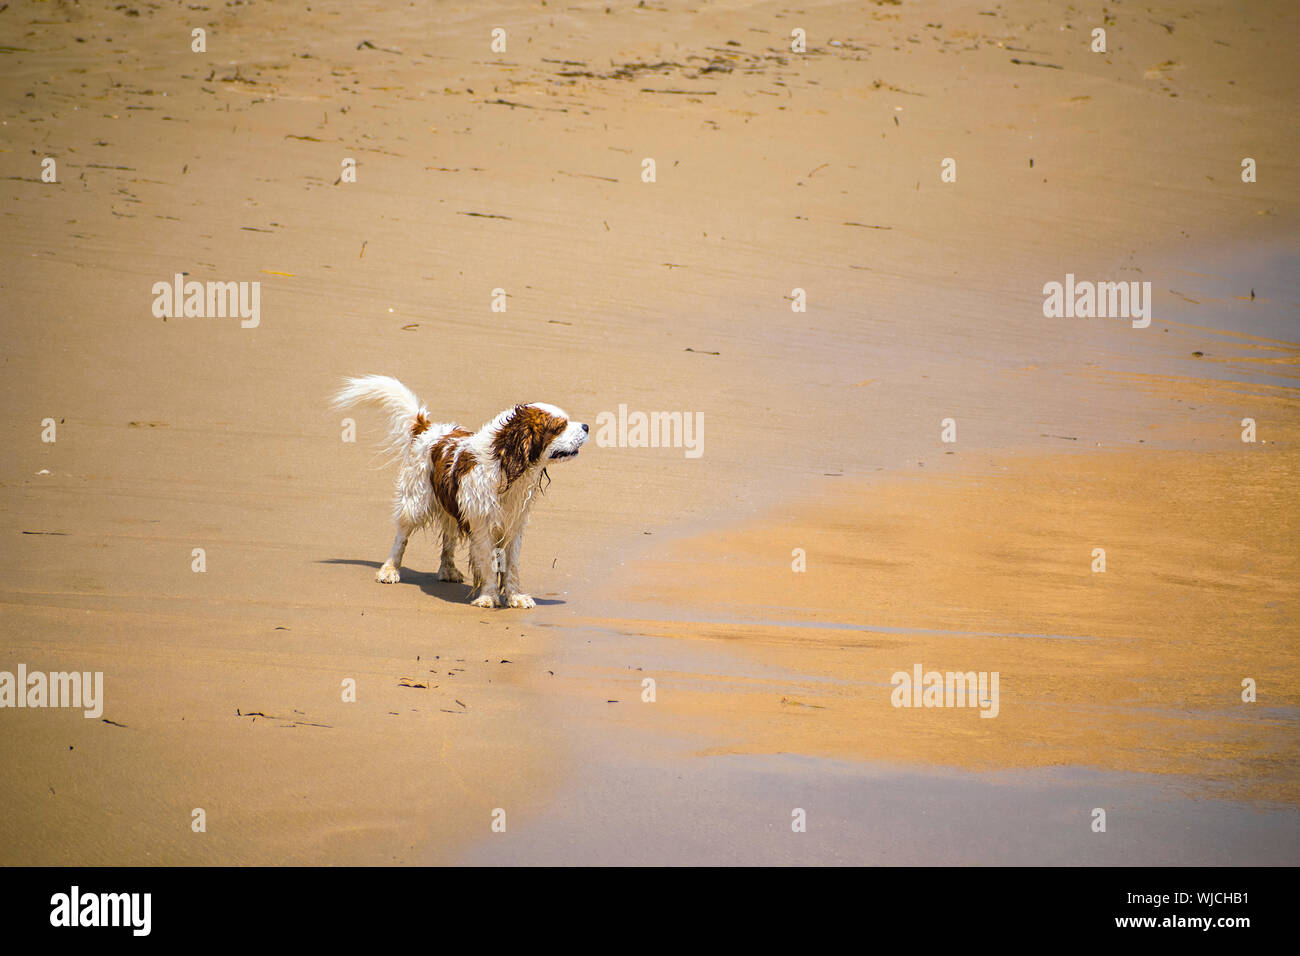 Cute dog standing on sand beach. Pet dogs in Summer at the seashore playing happily in Spain, 2019. Playful doggy pets. Stock Photo